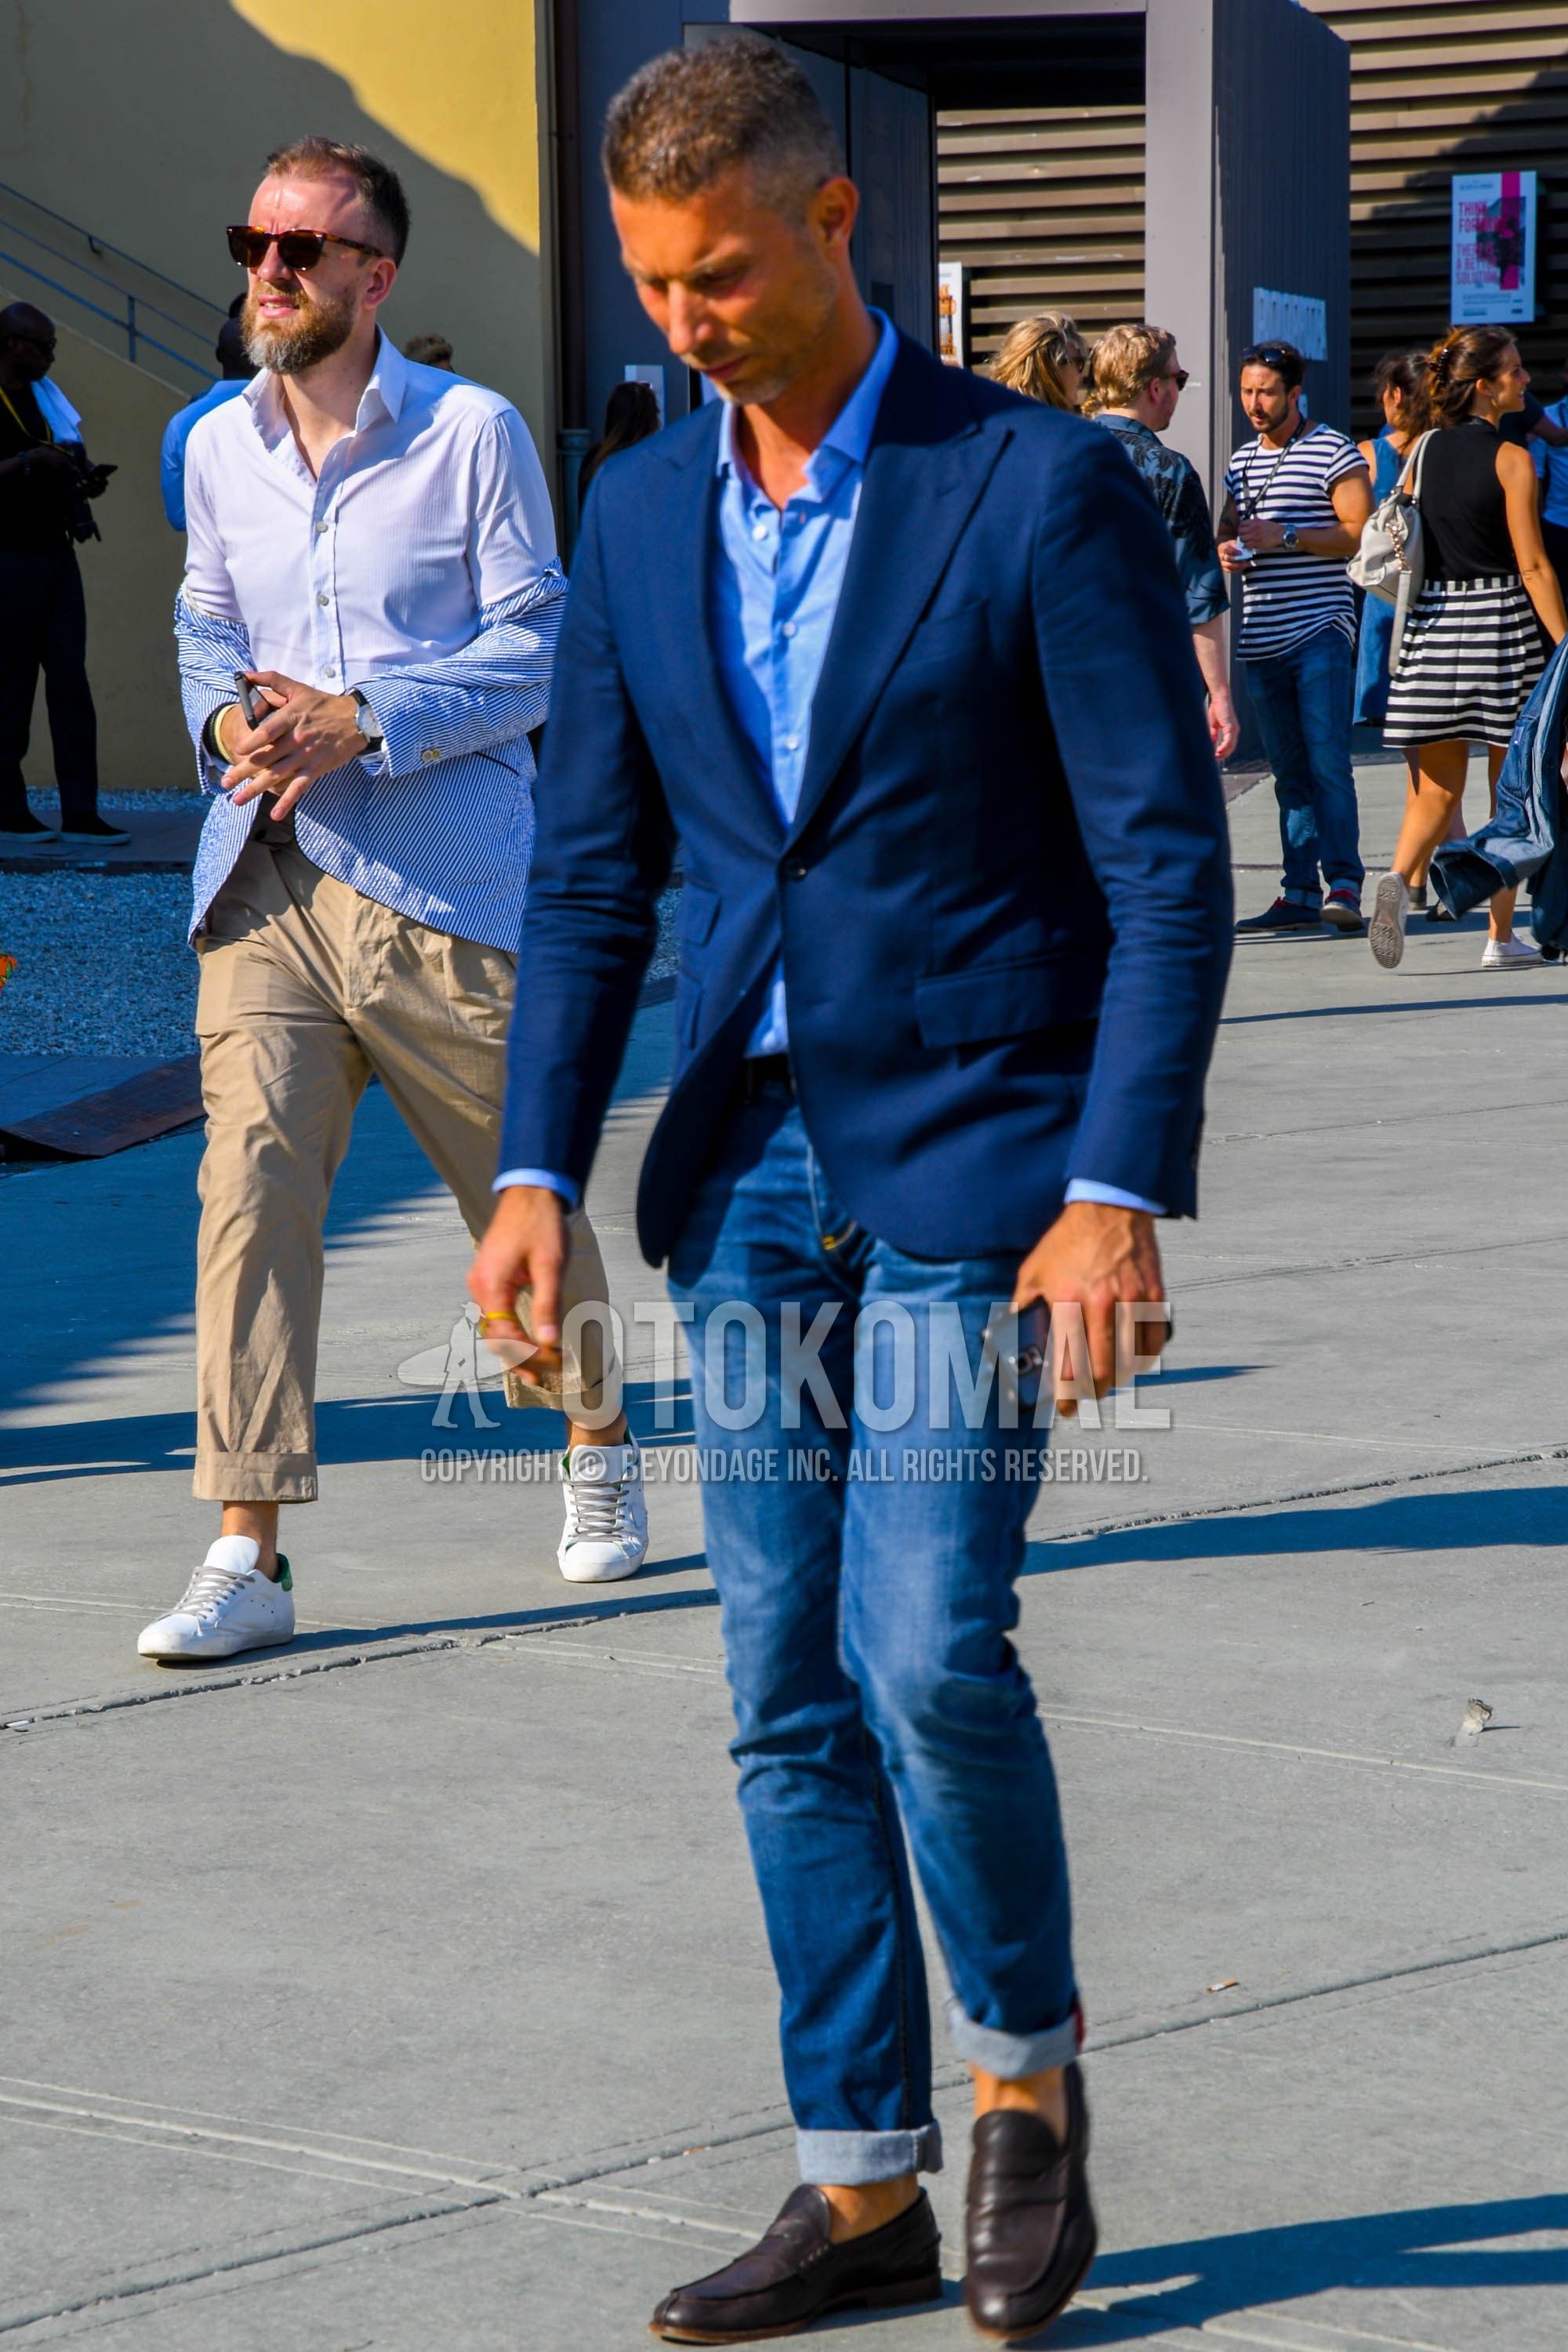 Men's spring summer autumn outfit with navy plain tailored jacket, light blue plain shirt, blue plain denim/jeans, brown coin loafers leather shoes.